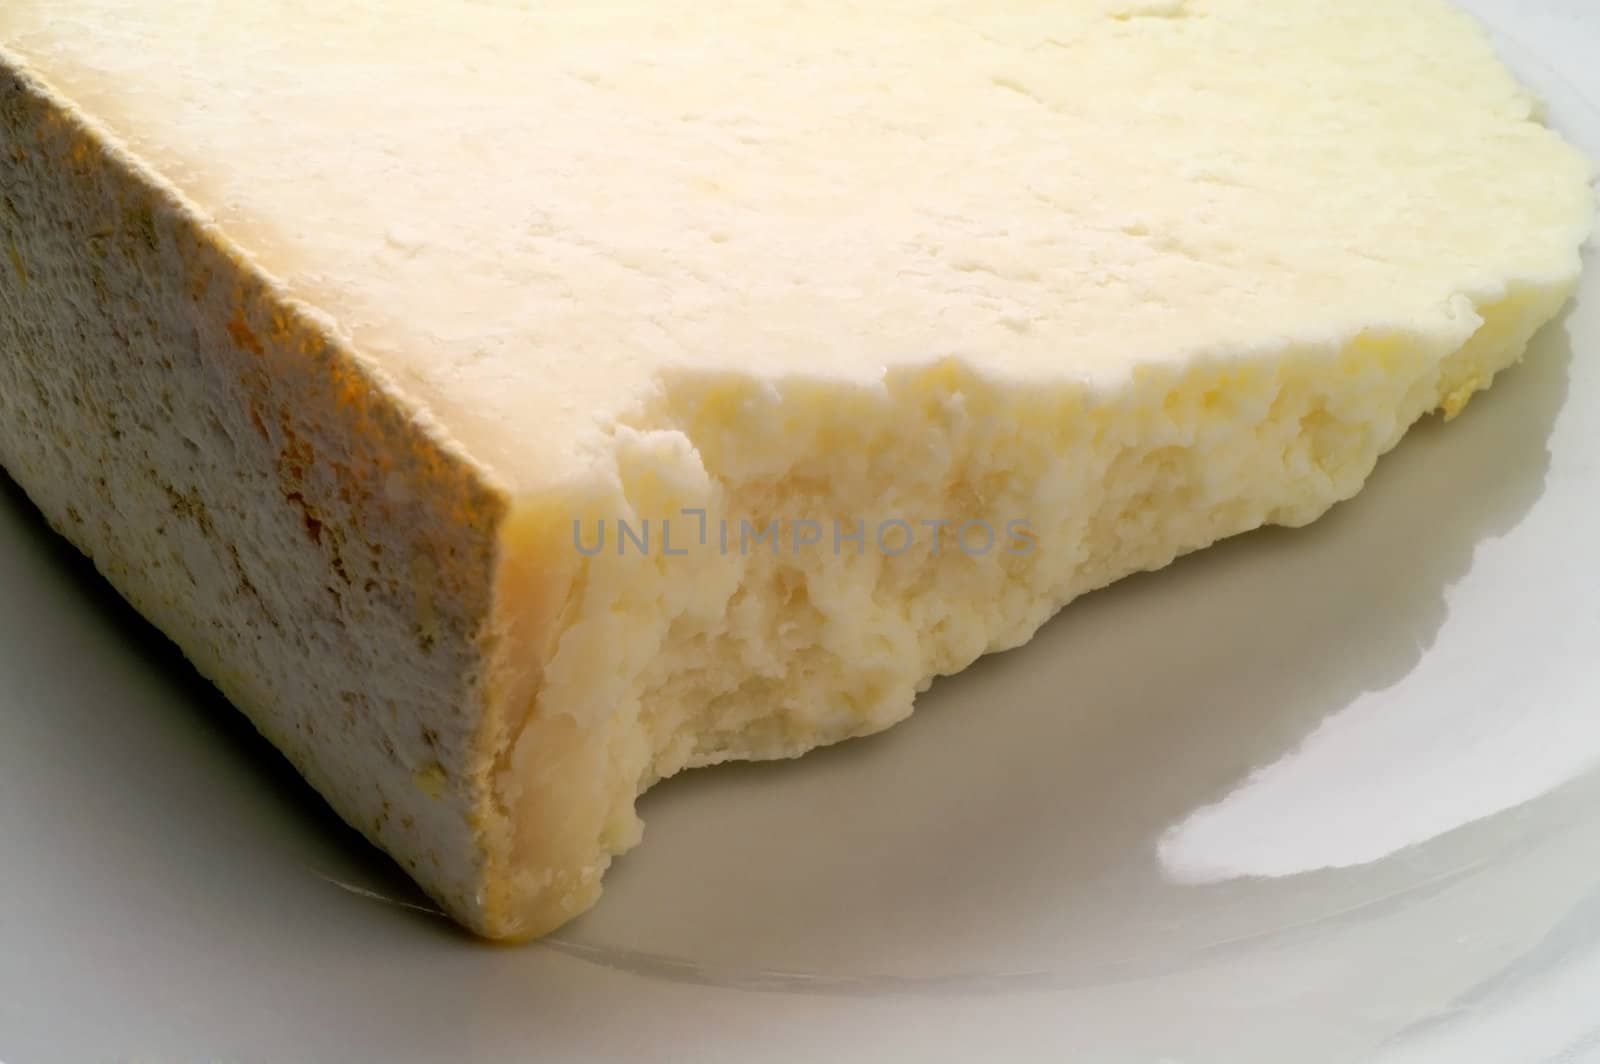 Aged cheese closeup (3): Castelmagno by Laborer